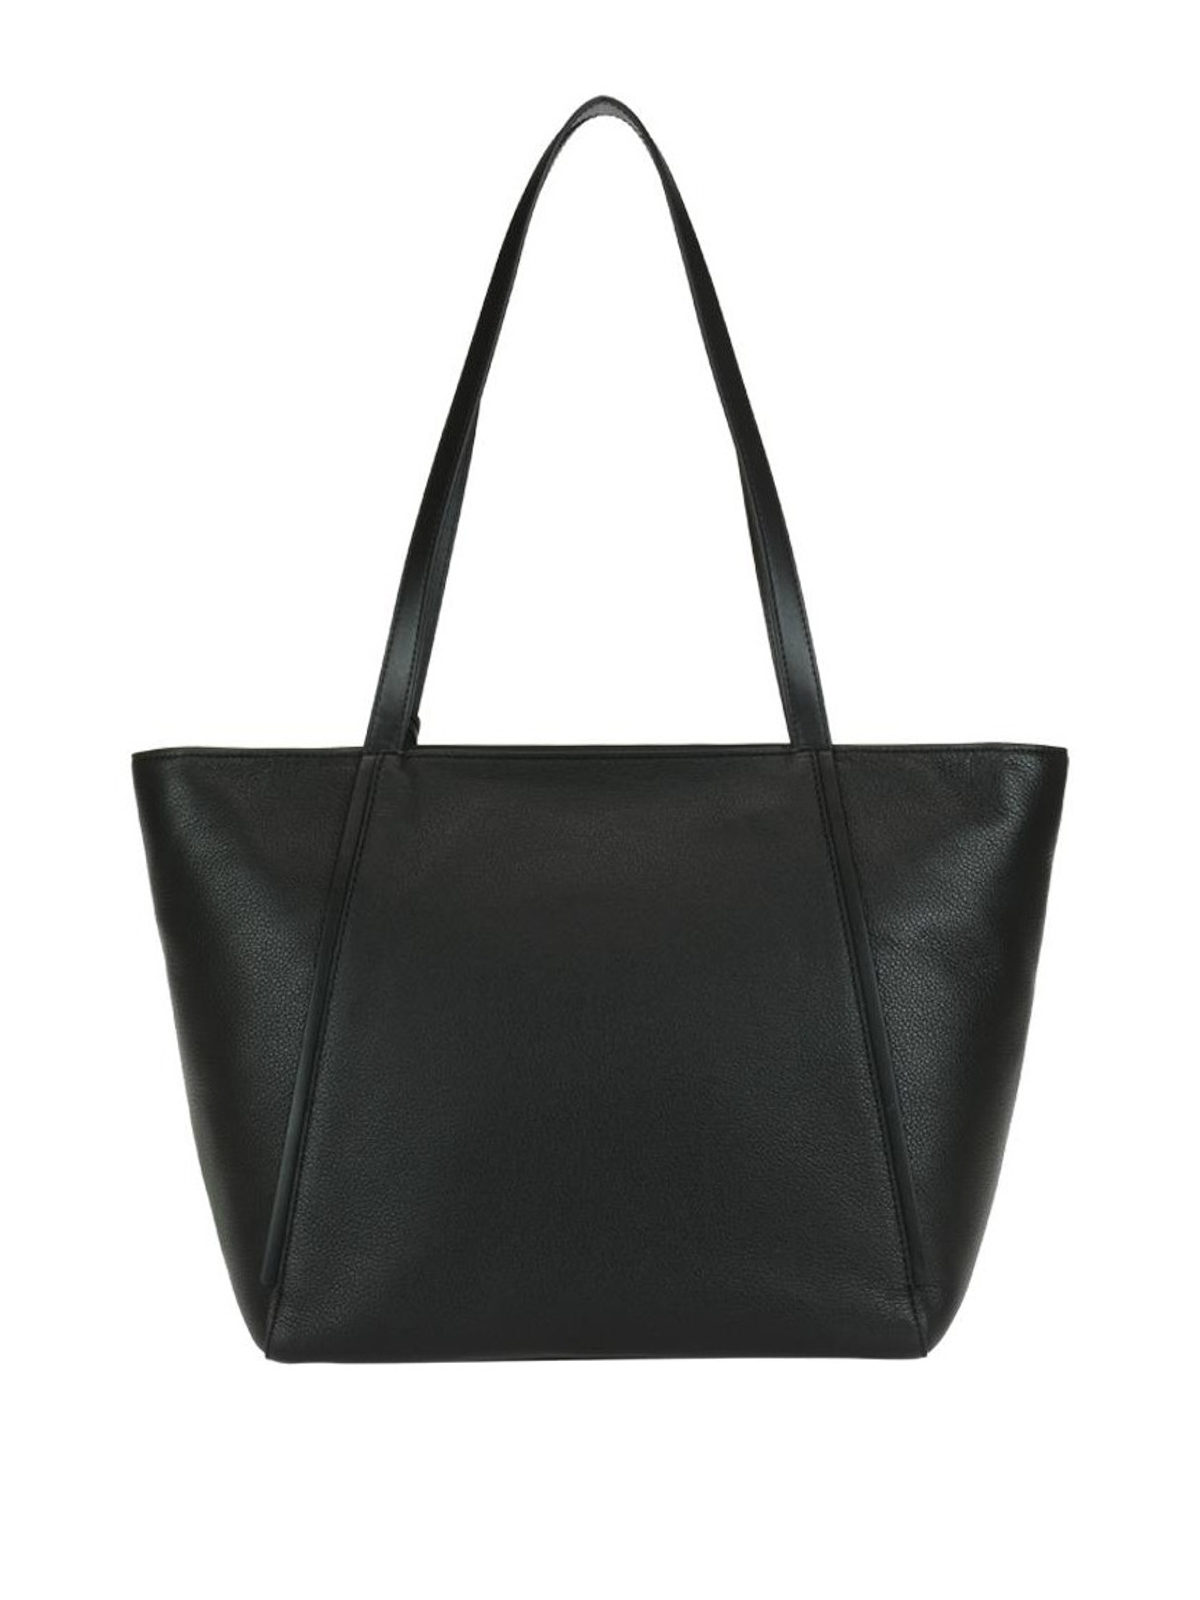 Michael Kors - Whitney black leather large tote - totes bags ...